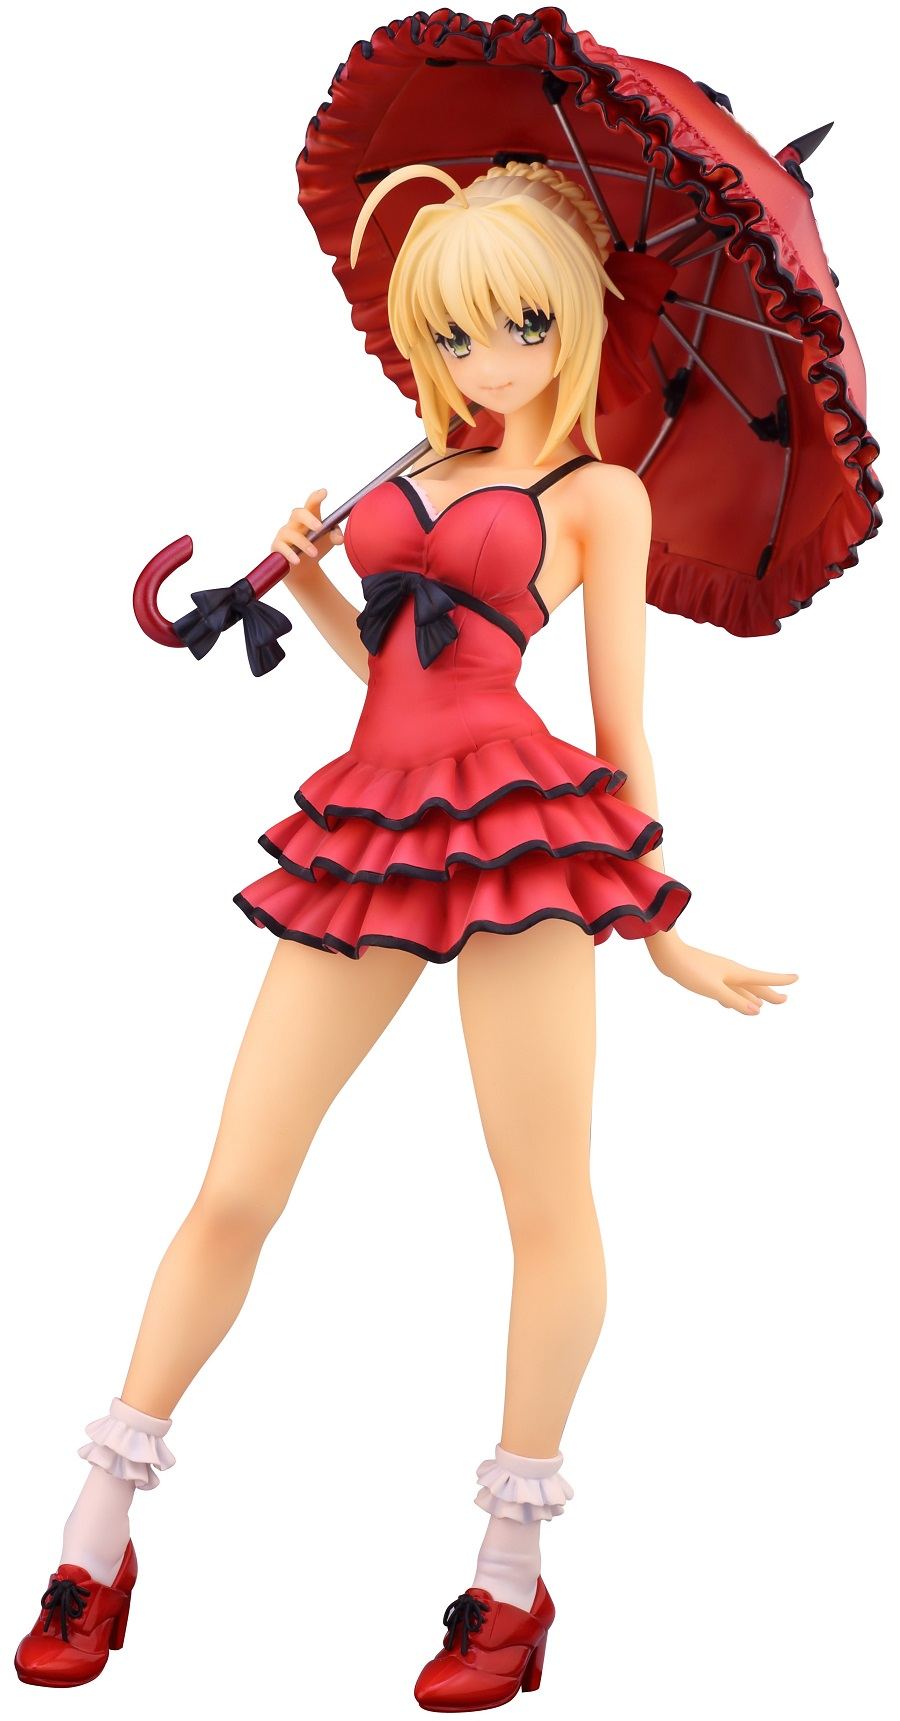 FATE/EXTRA CCC 1/7 SCALE PRE-PAINTED FIGURE: SABER ONE-PIECE DRESS VER. (RE-RUN) Alphamax